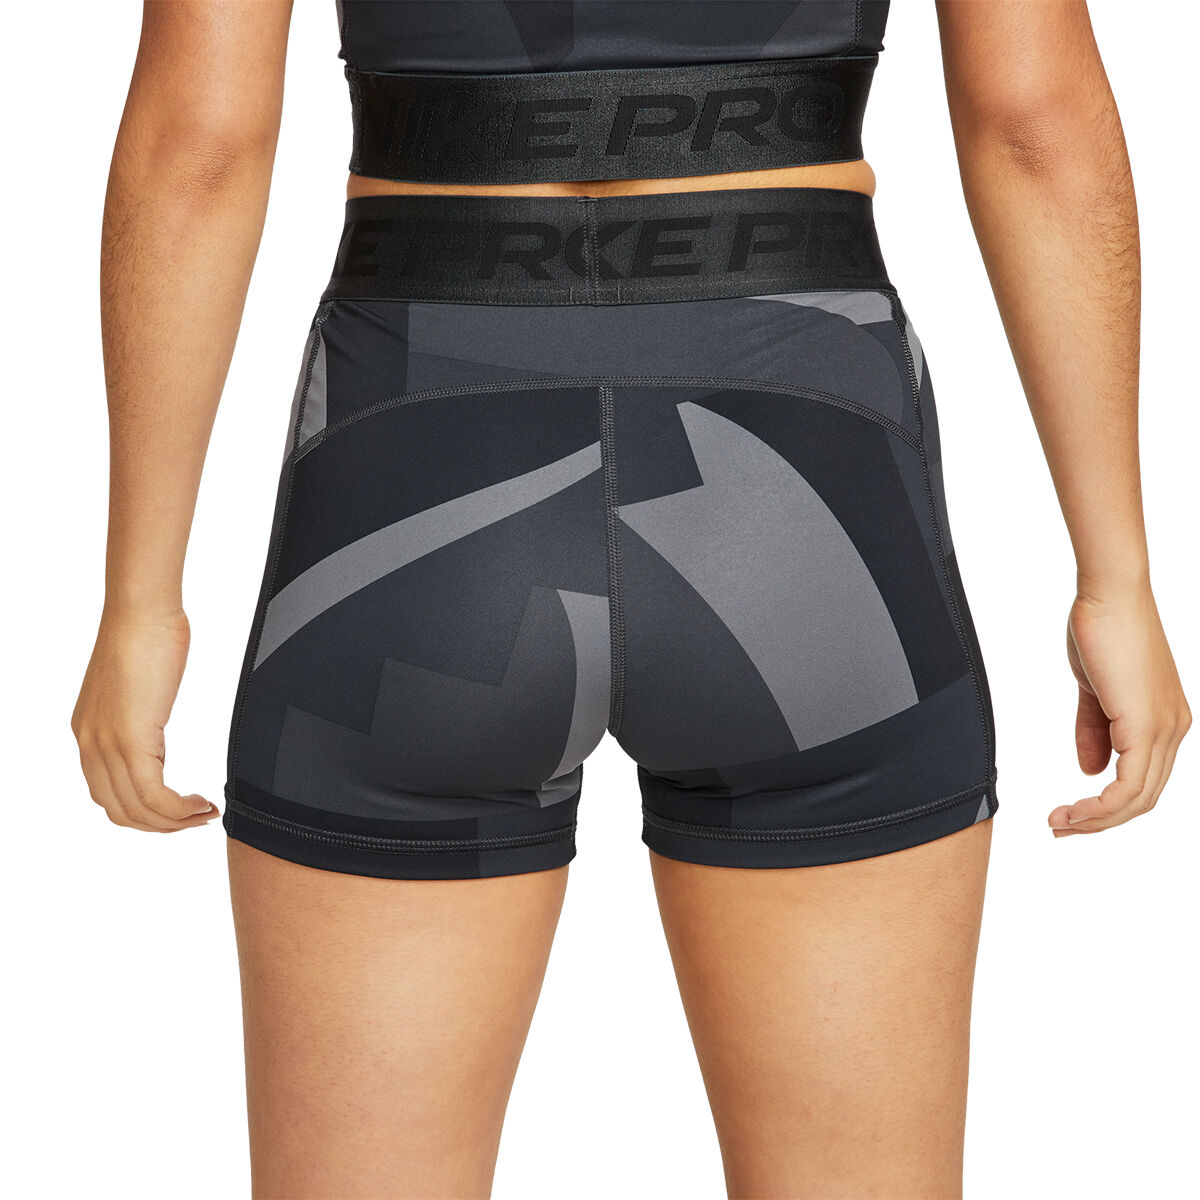 Under Armour Womens Mid Rise Shorts - Black